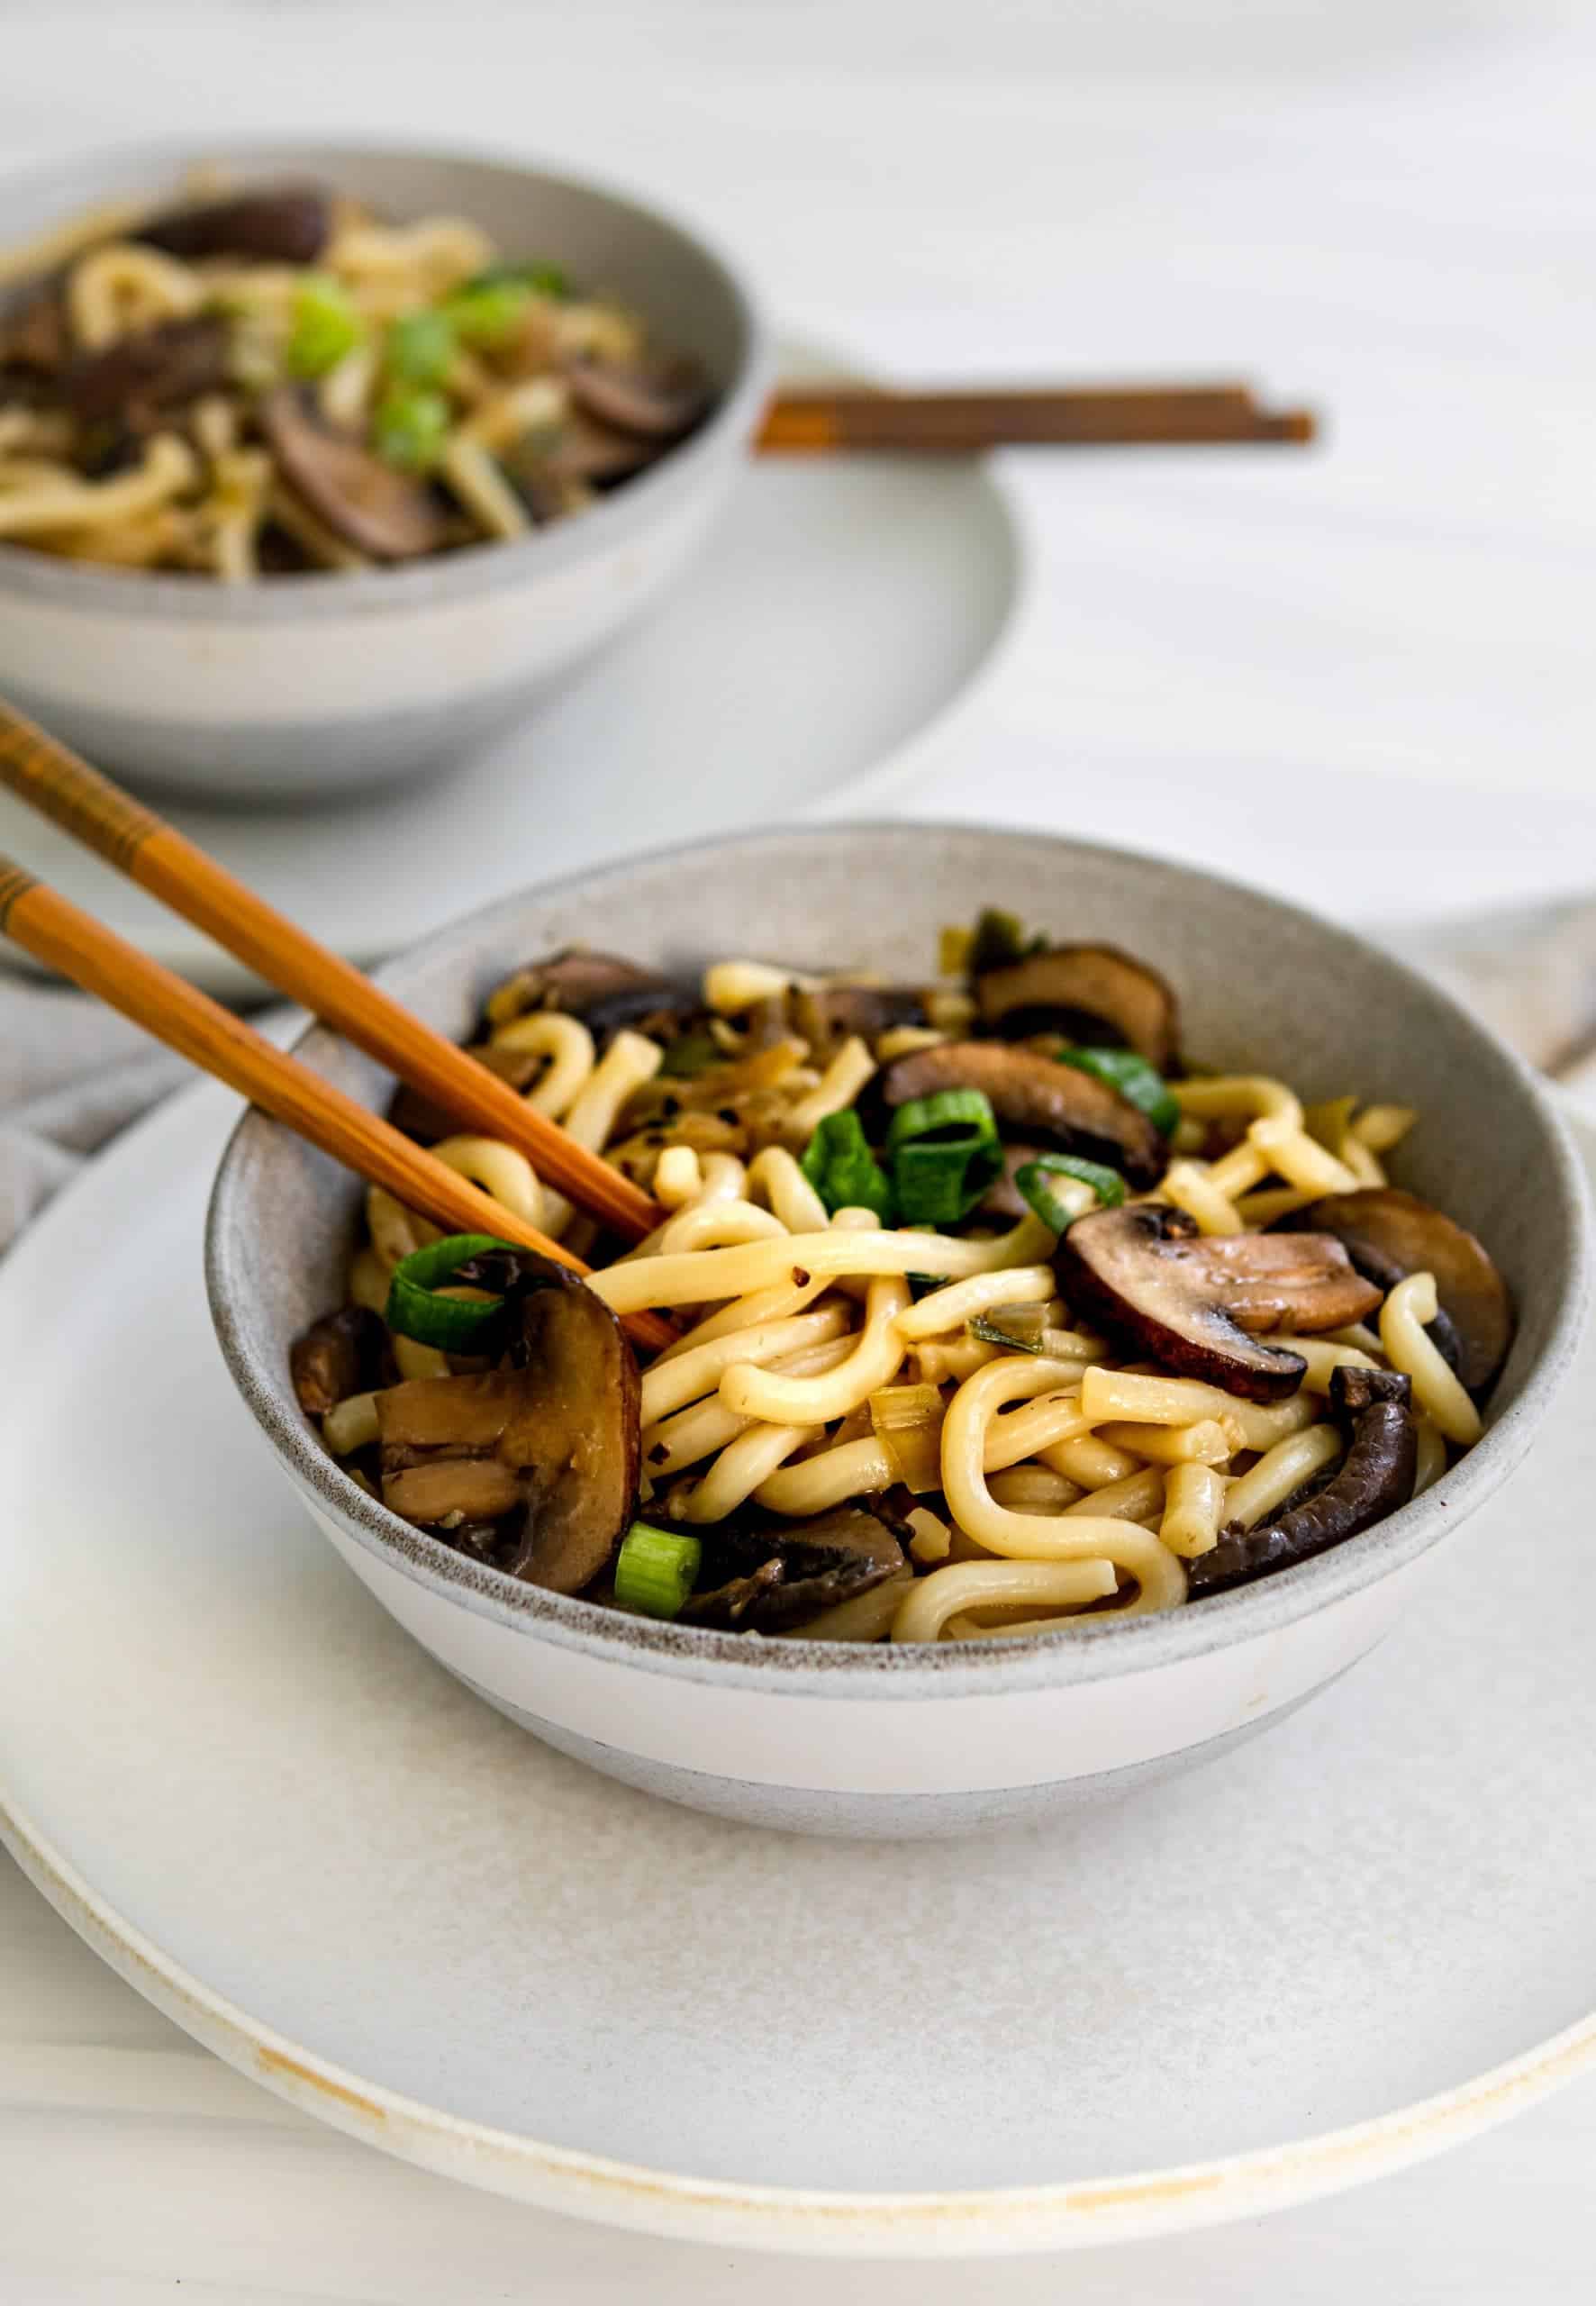 noodles with mushrooms, garnished with fresh green onions